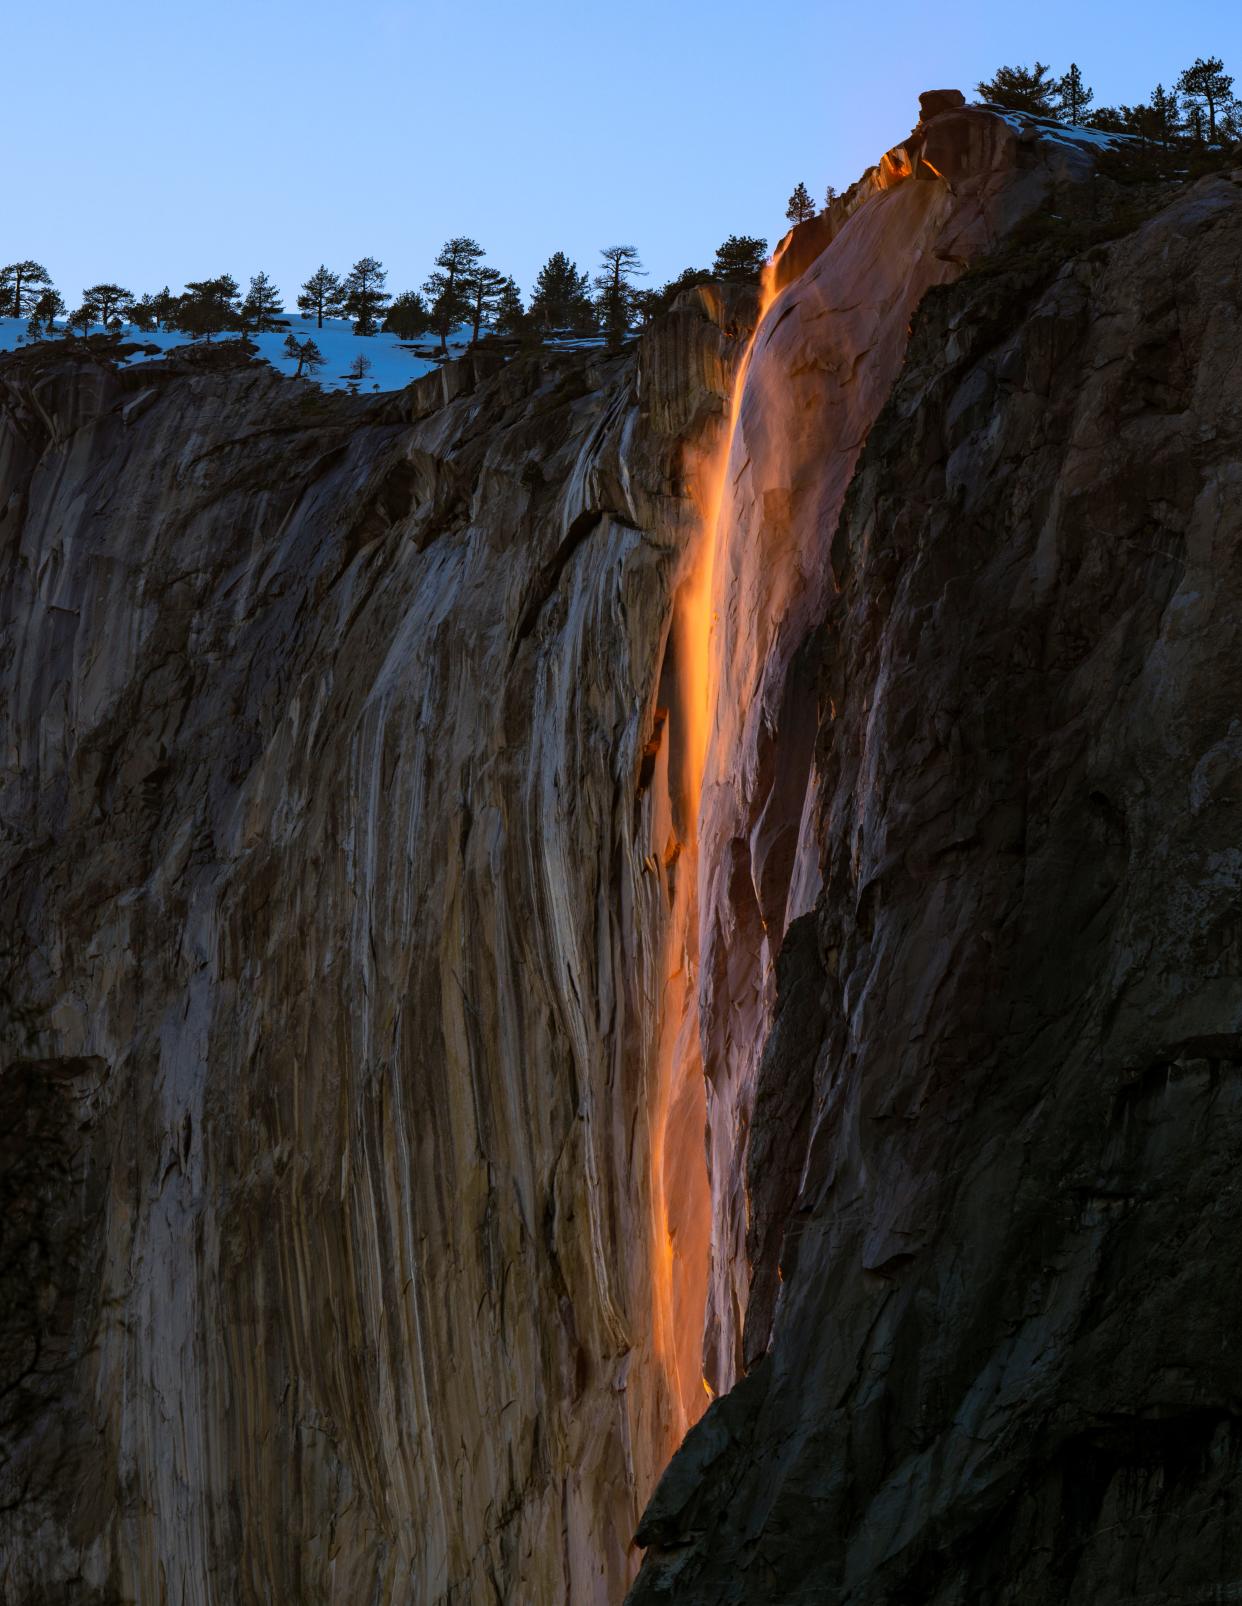 Horsetail Fall glows Monday, February 13, 2023 as light from the setting sun strikes El Capitan in Yosemite National Park. Weather permitting, the event occurs every year when the sun sets in the right spot of the horizon to shine directly onto El Capitan for about ten minutes at the end of each day. Best viewing is in the last two weeks of February. The light strikes El Capitan the same way in October but the snow caps that feed the fall are dry. Reservations are required to drive into the park on Fridays, Saturdays and Sundays through the month of February.